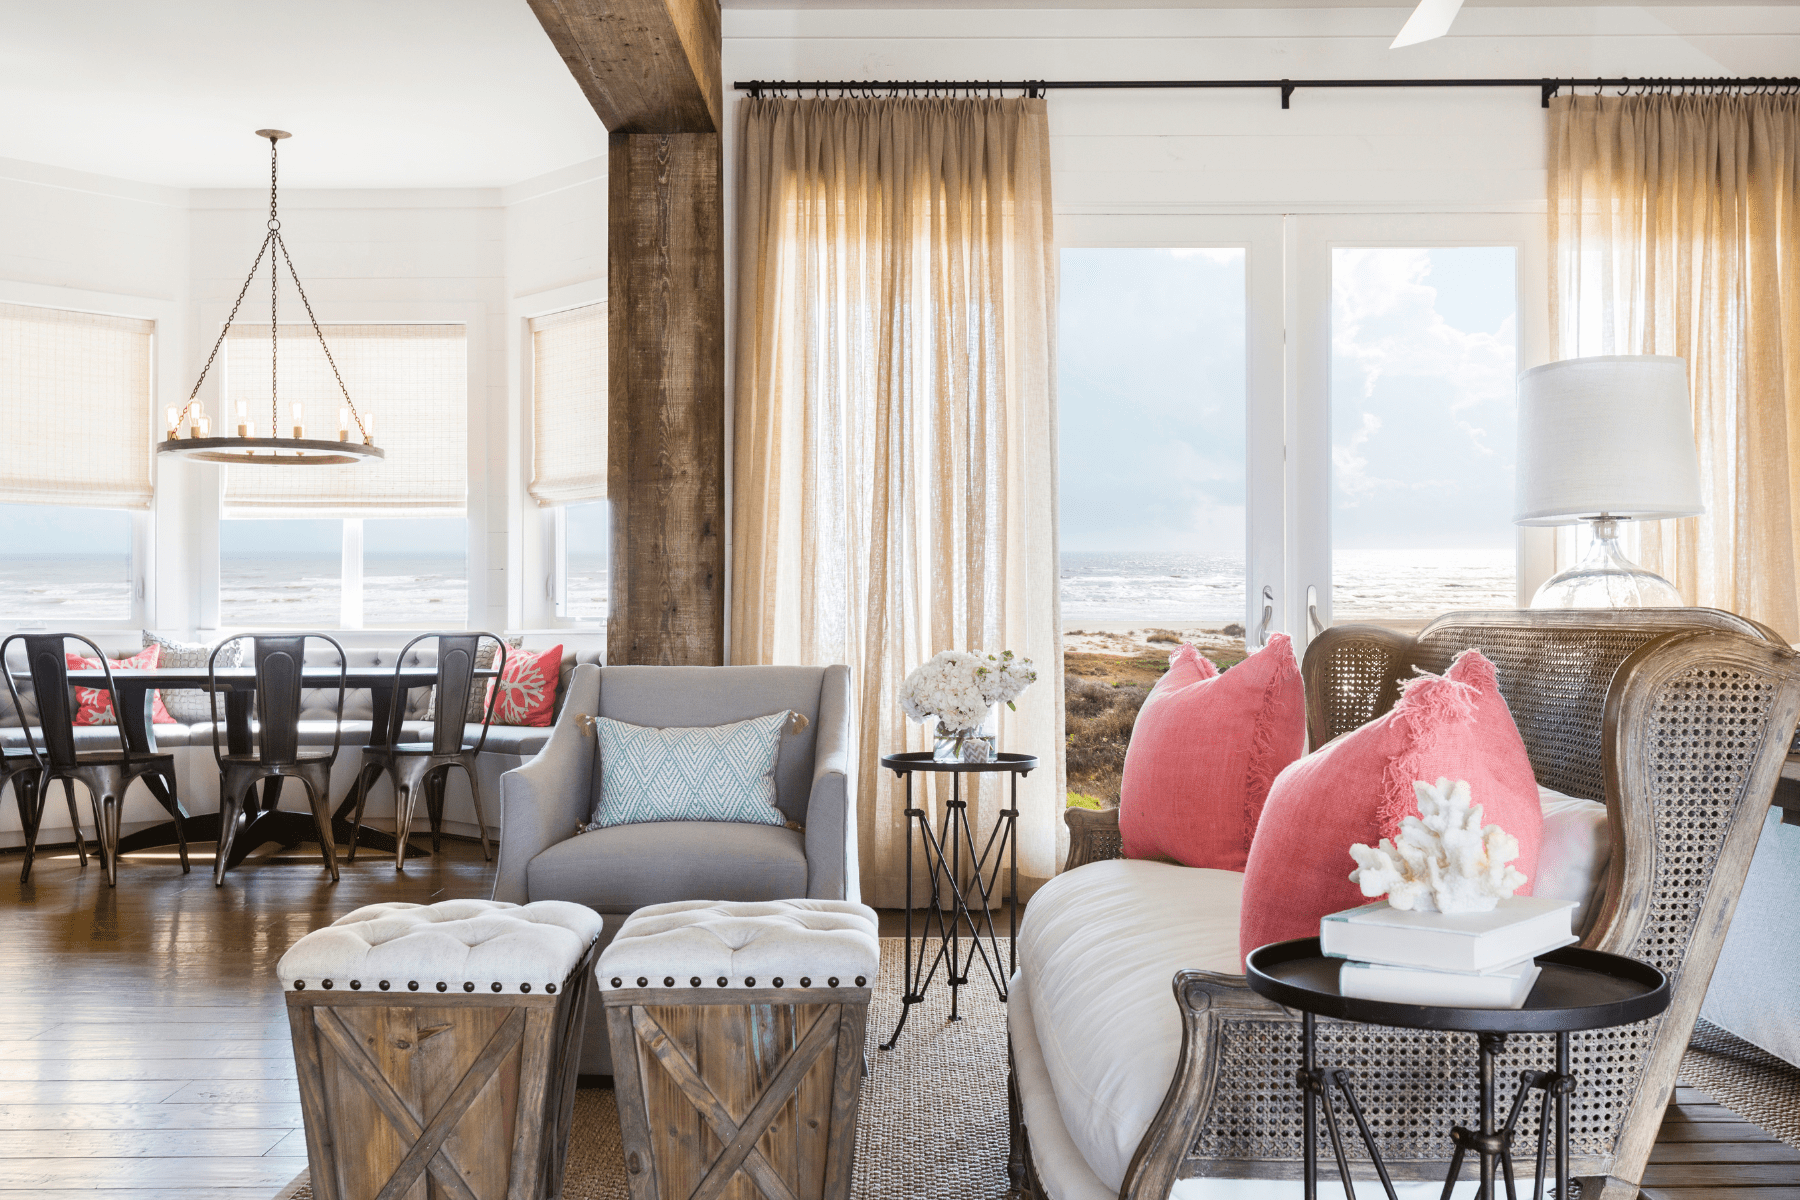 The Sandhill Shores living area with hints of peach and splashes of light blue creating a vibrant beach feel.